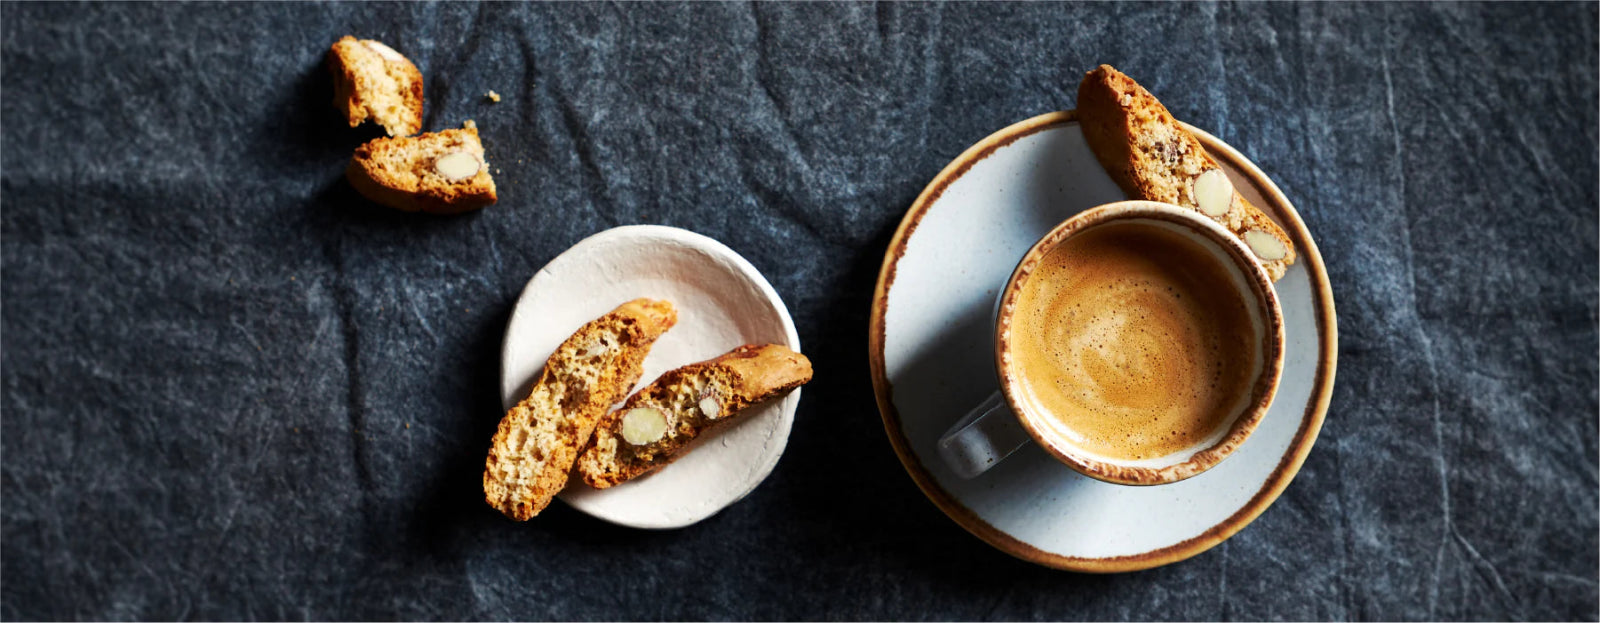 The Espresso Breakfast: Pairing Your Shot with Delicious Morning Treats - Anthony's Espresso